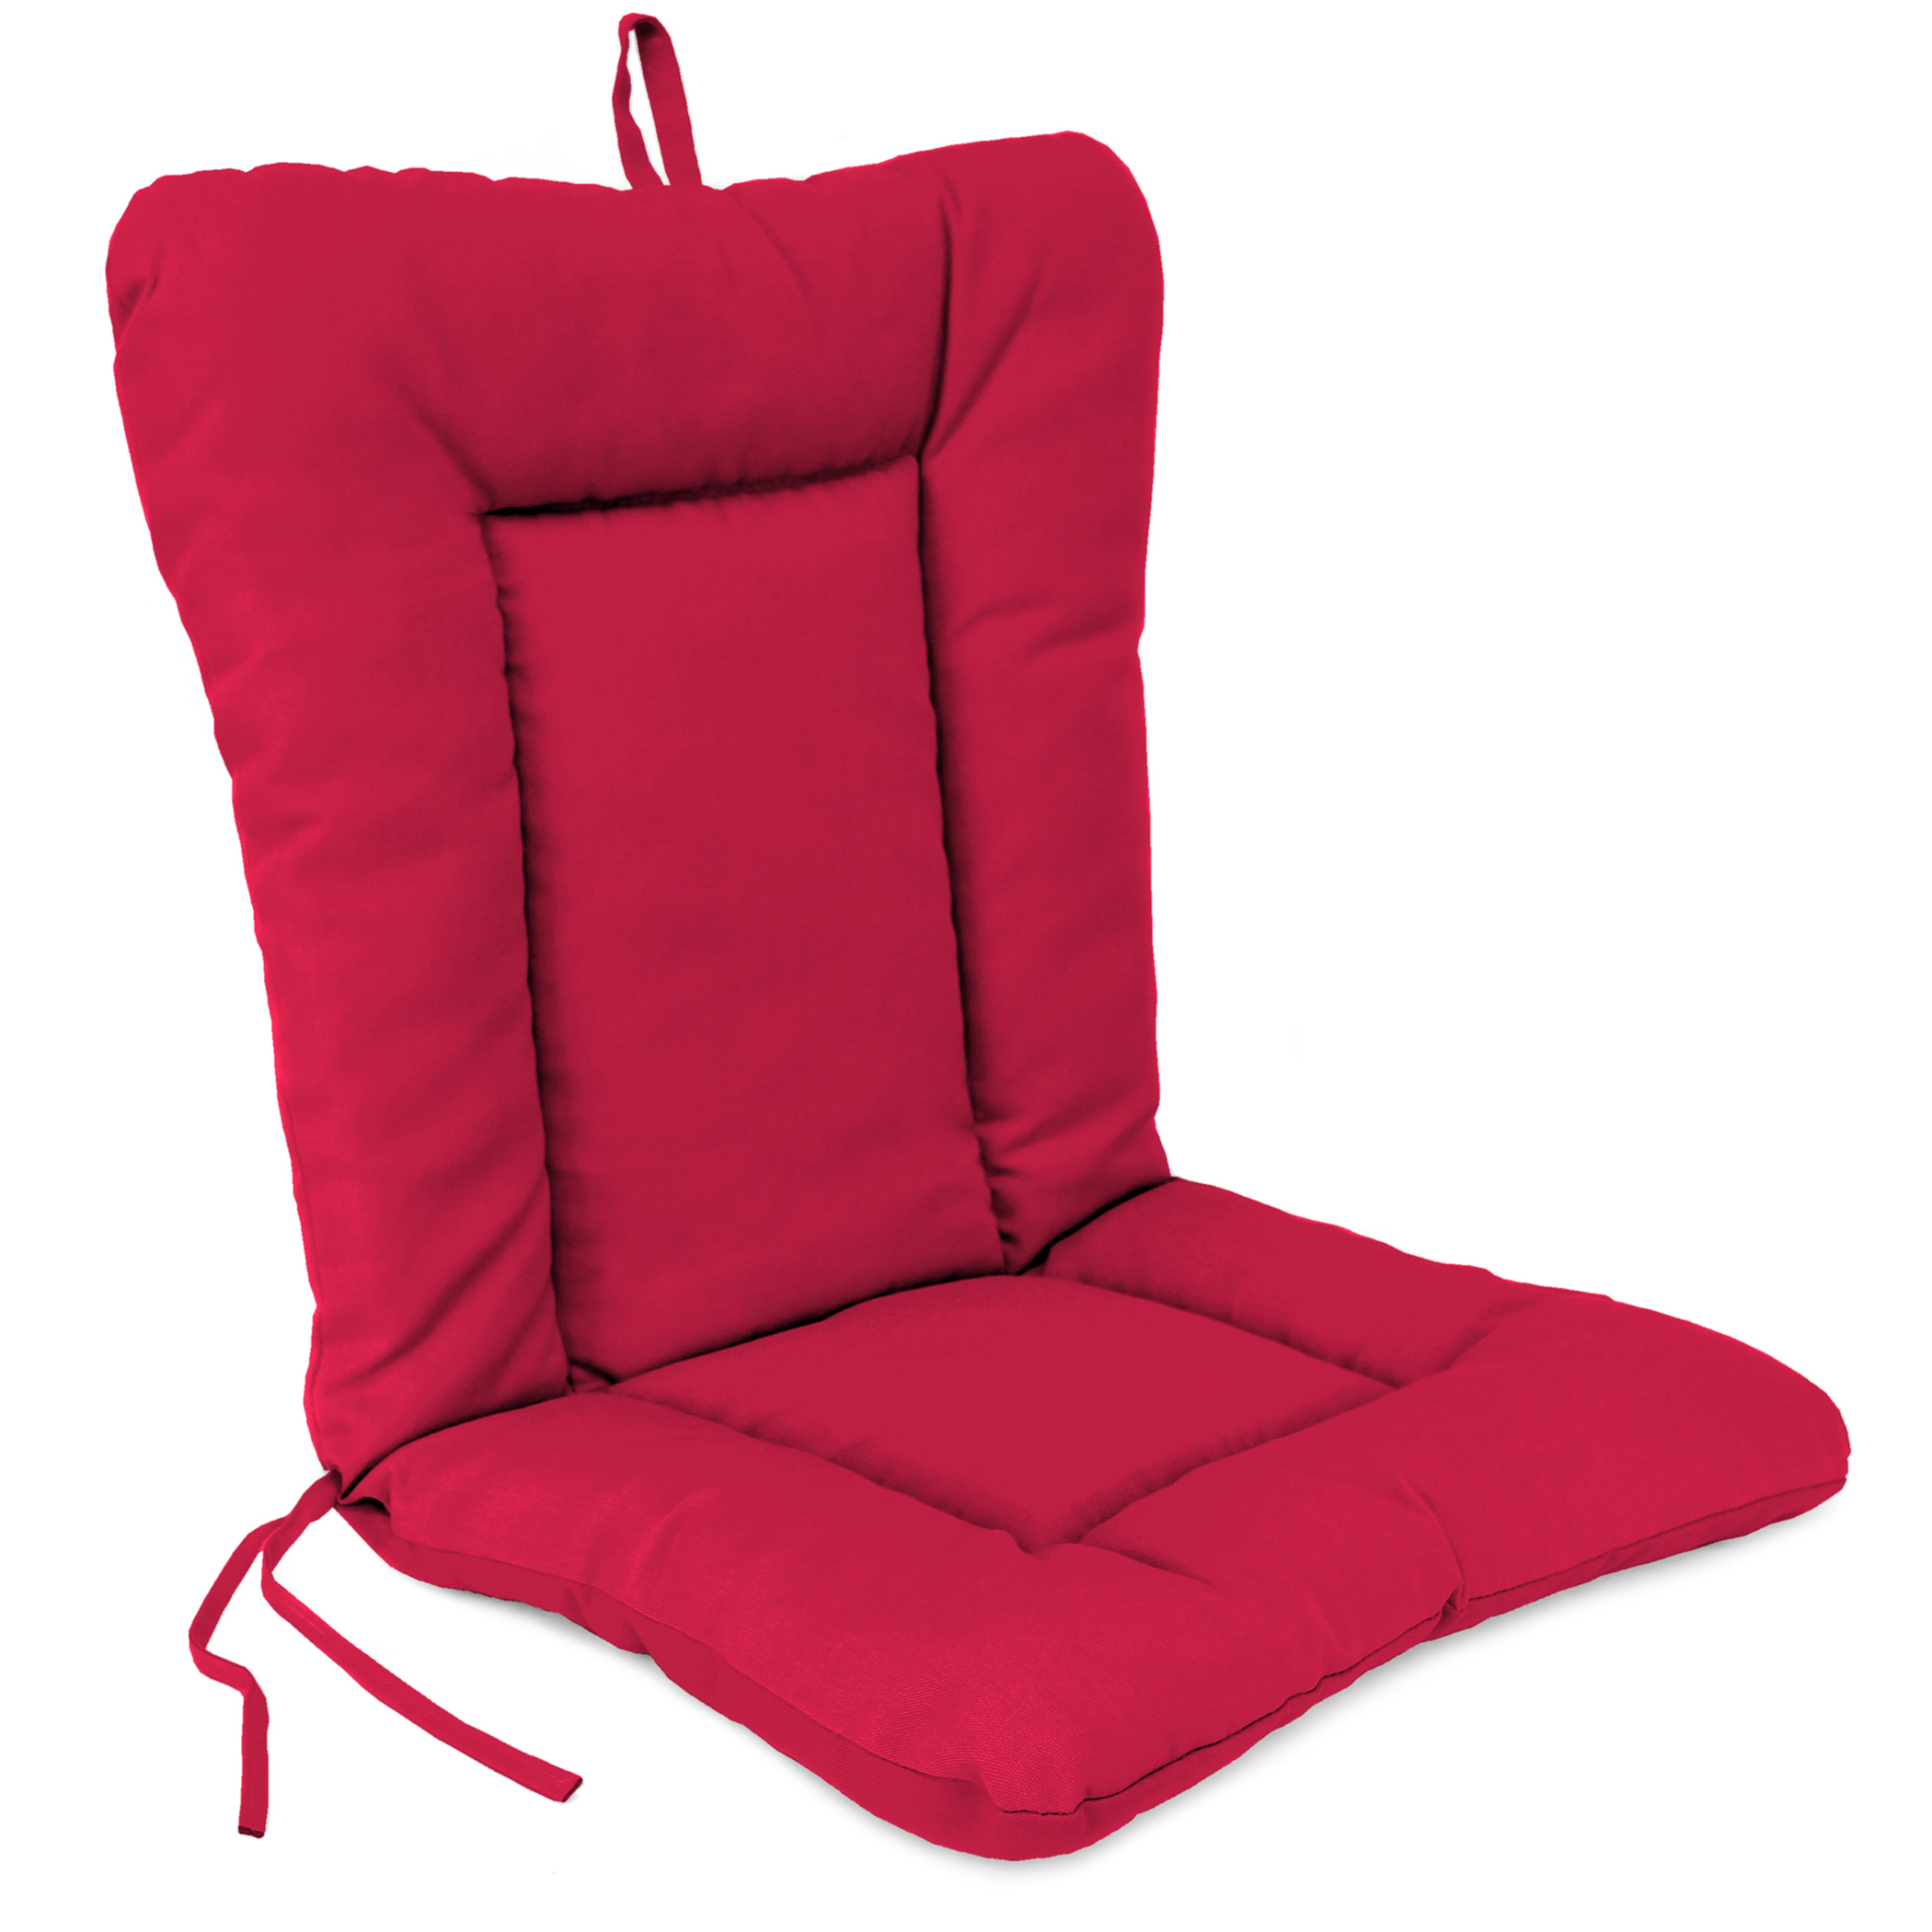 Jordan Manufacturing 38" x 21" Solid Pompei Red Euro Style Outdoor Chair Cushion - image 1 of 11